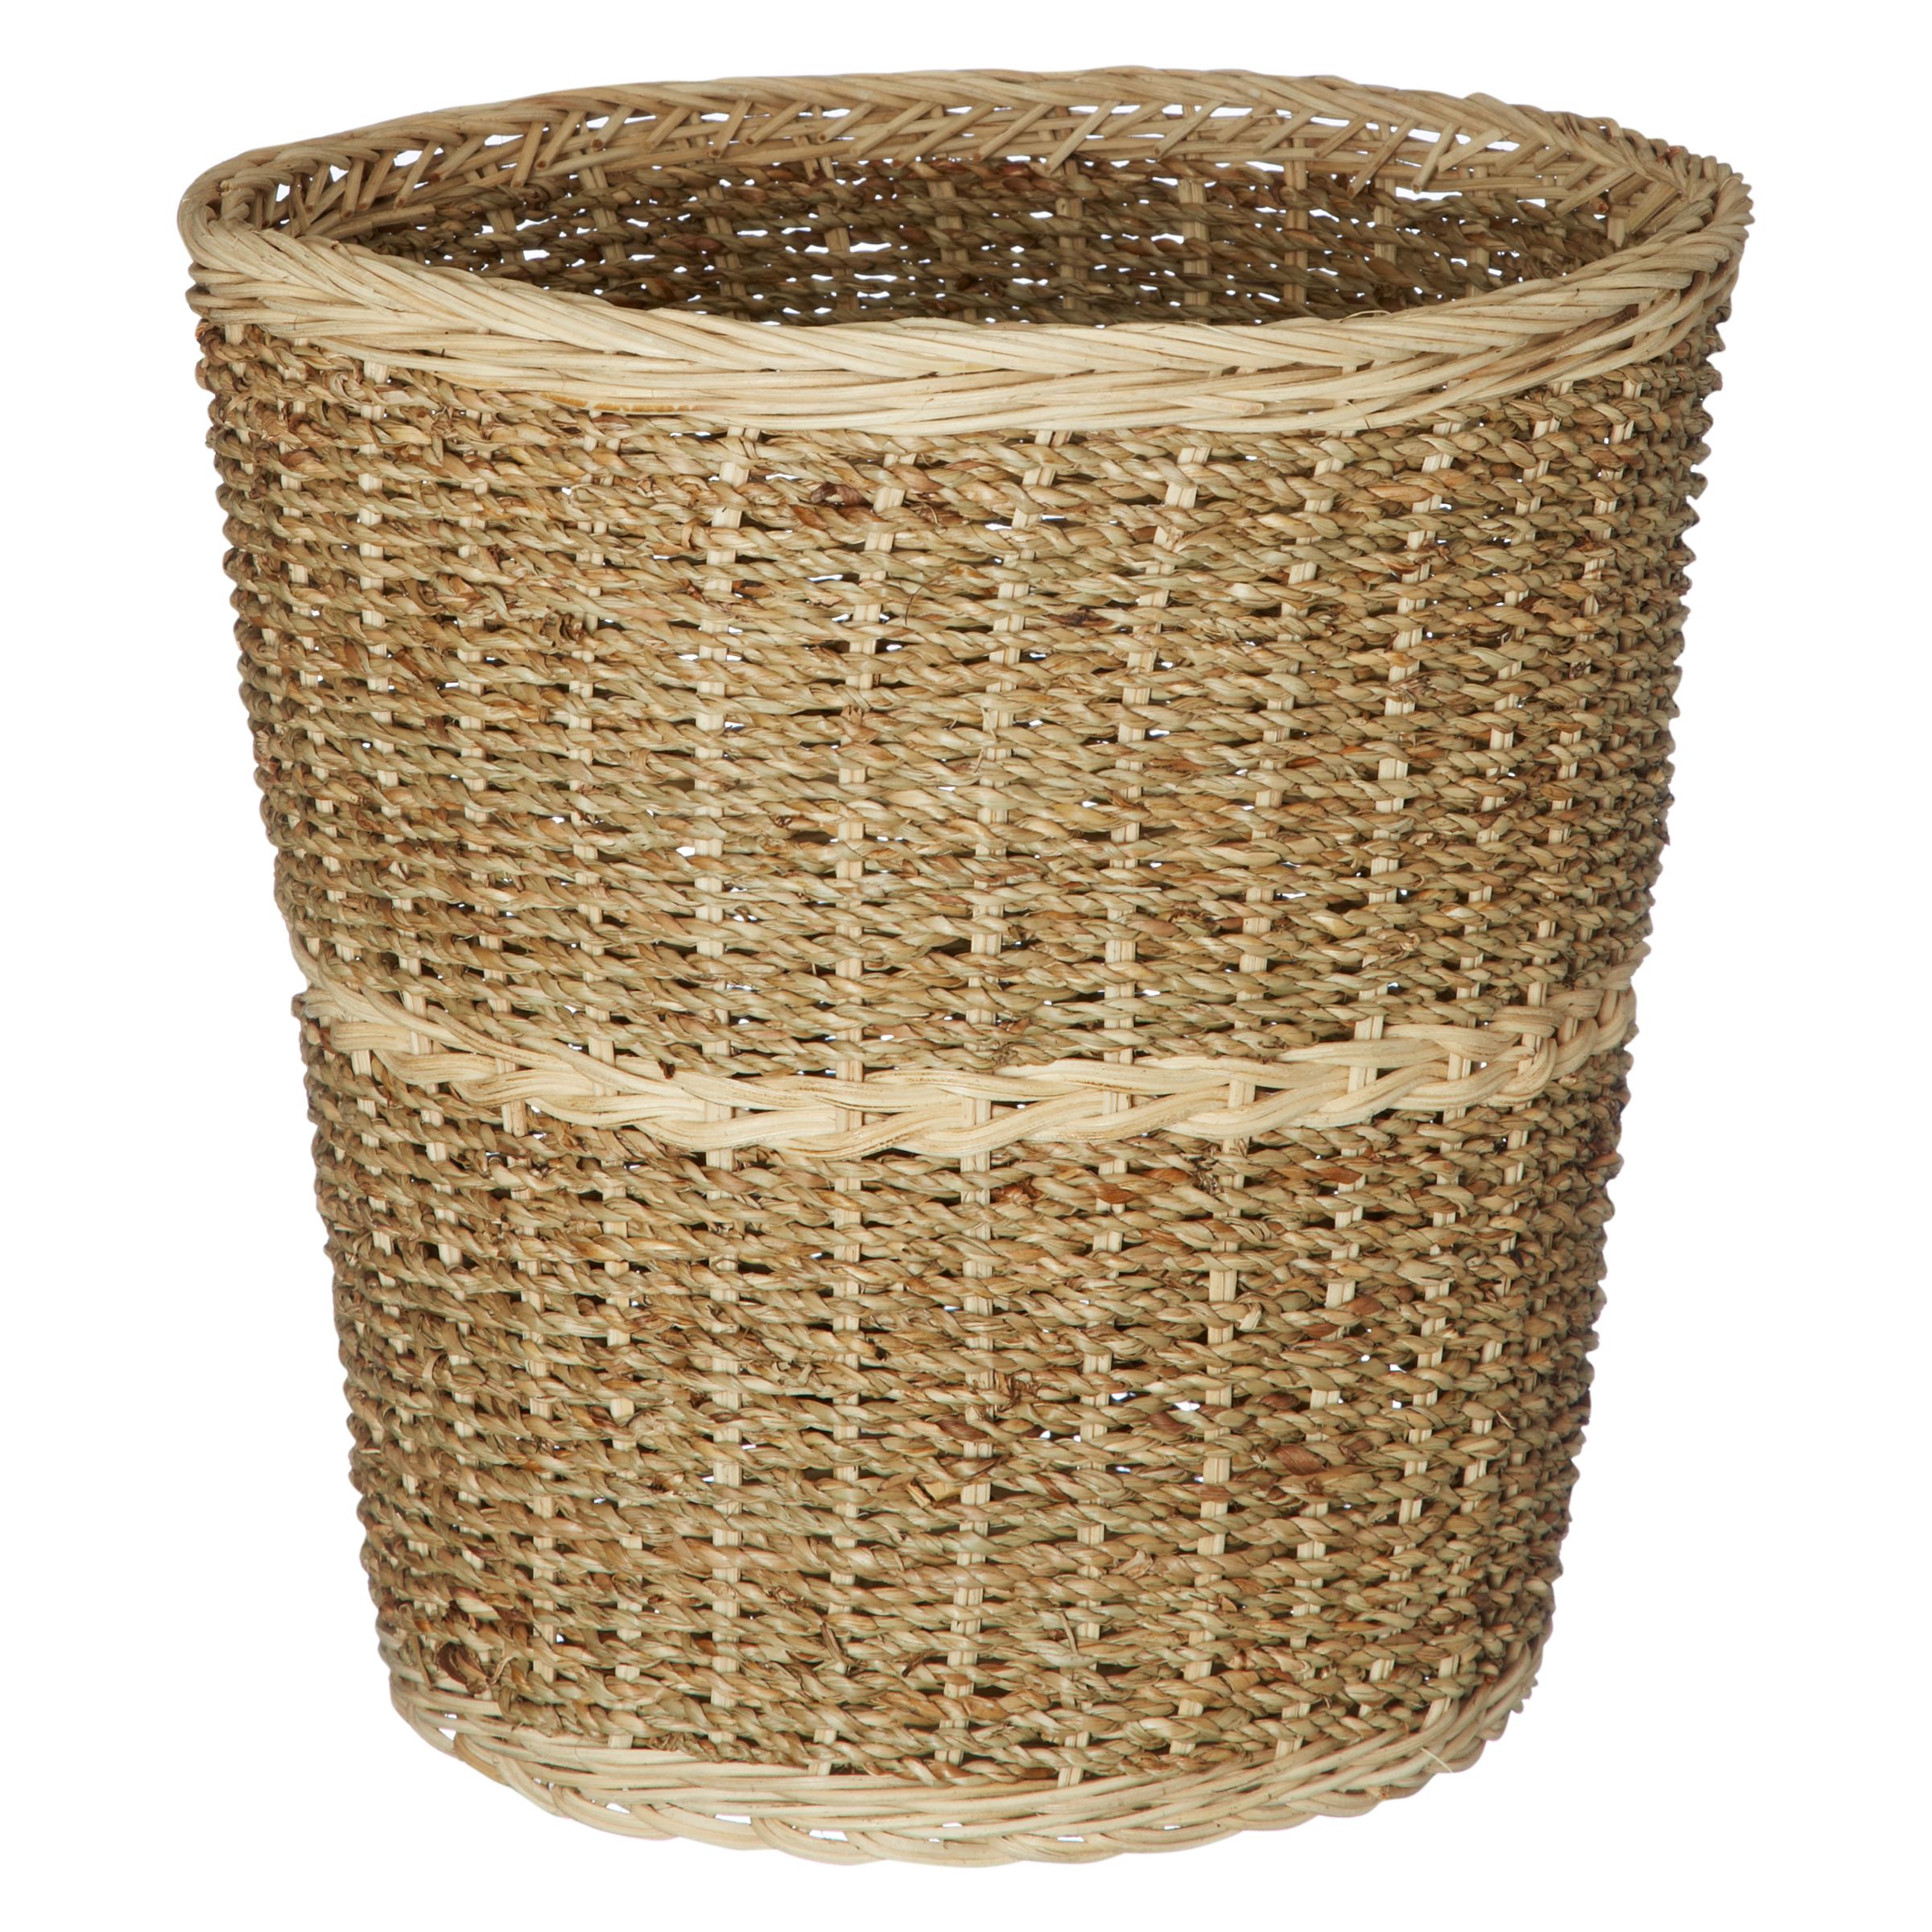 John Lewis Striped Seagrass and Wicker Wastepaper Basket